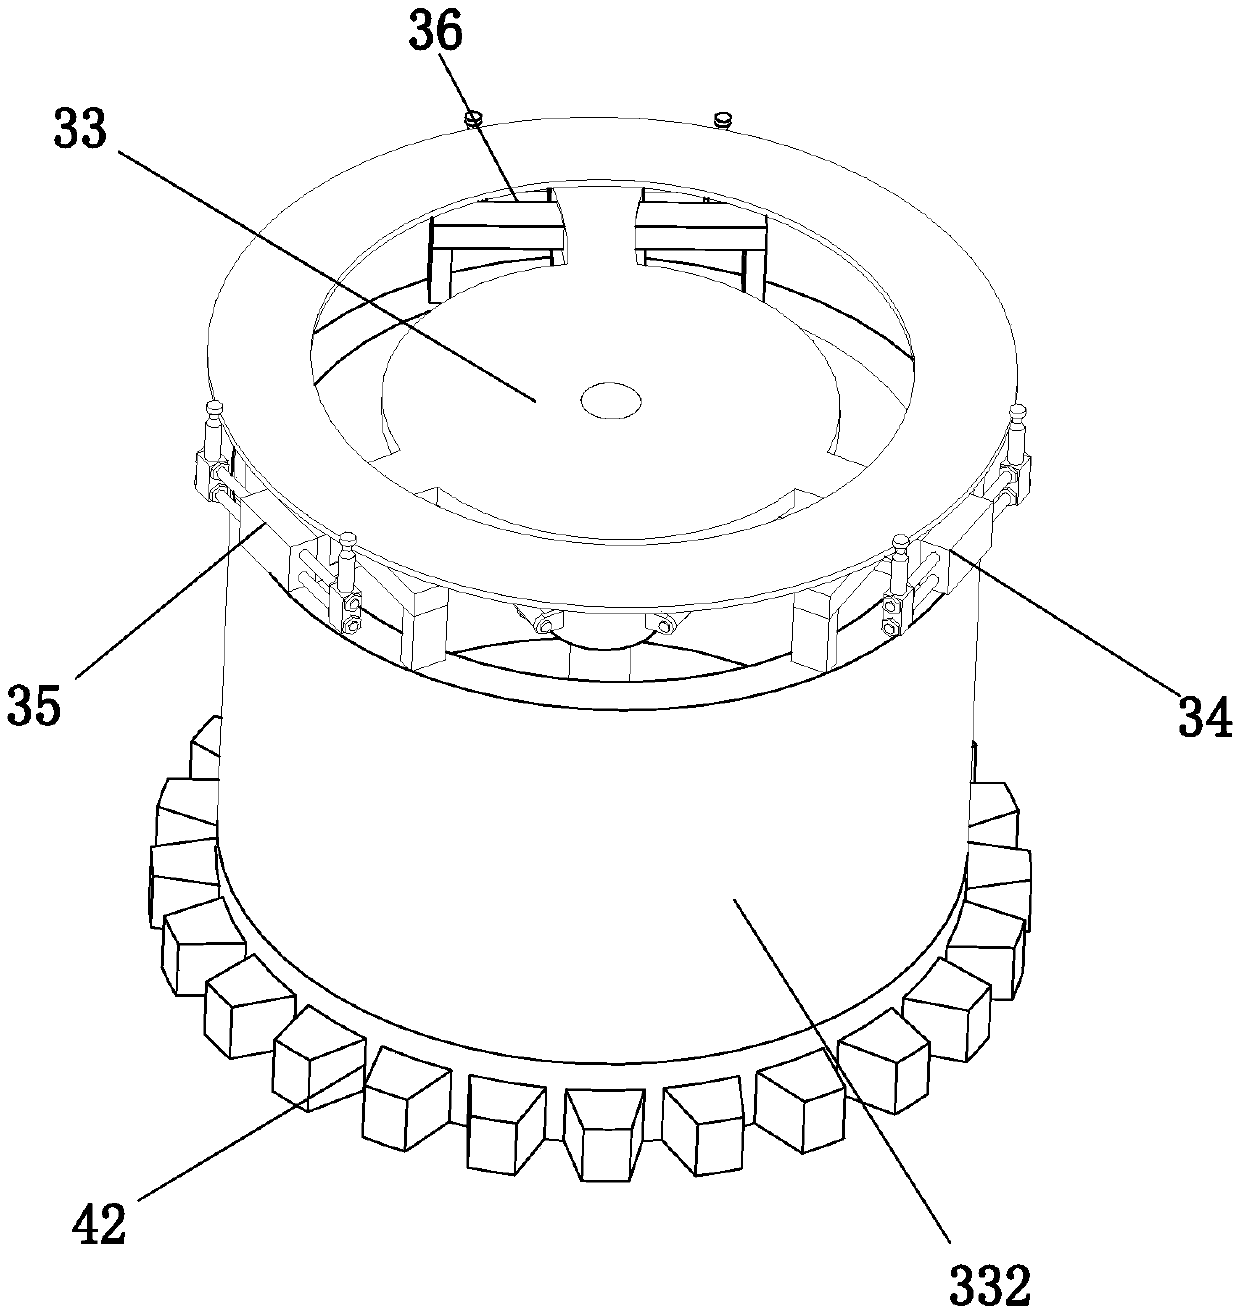 Processing device suitable for drilling disc flanges of plurality of specifications